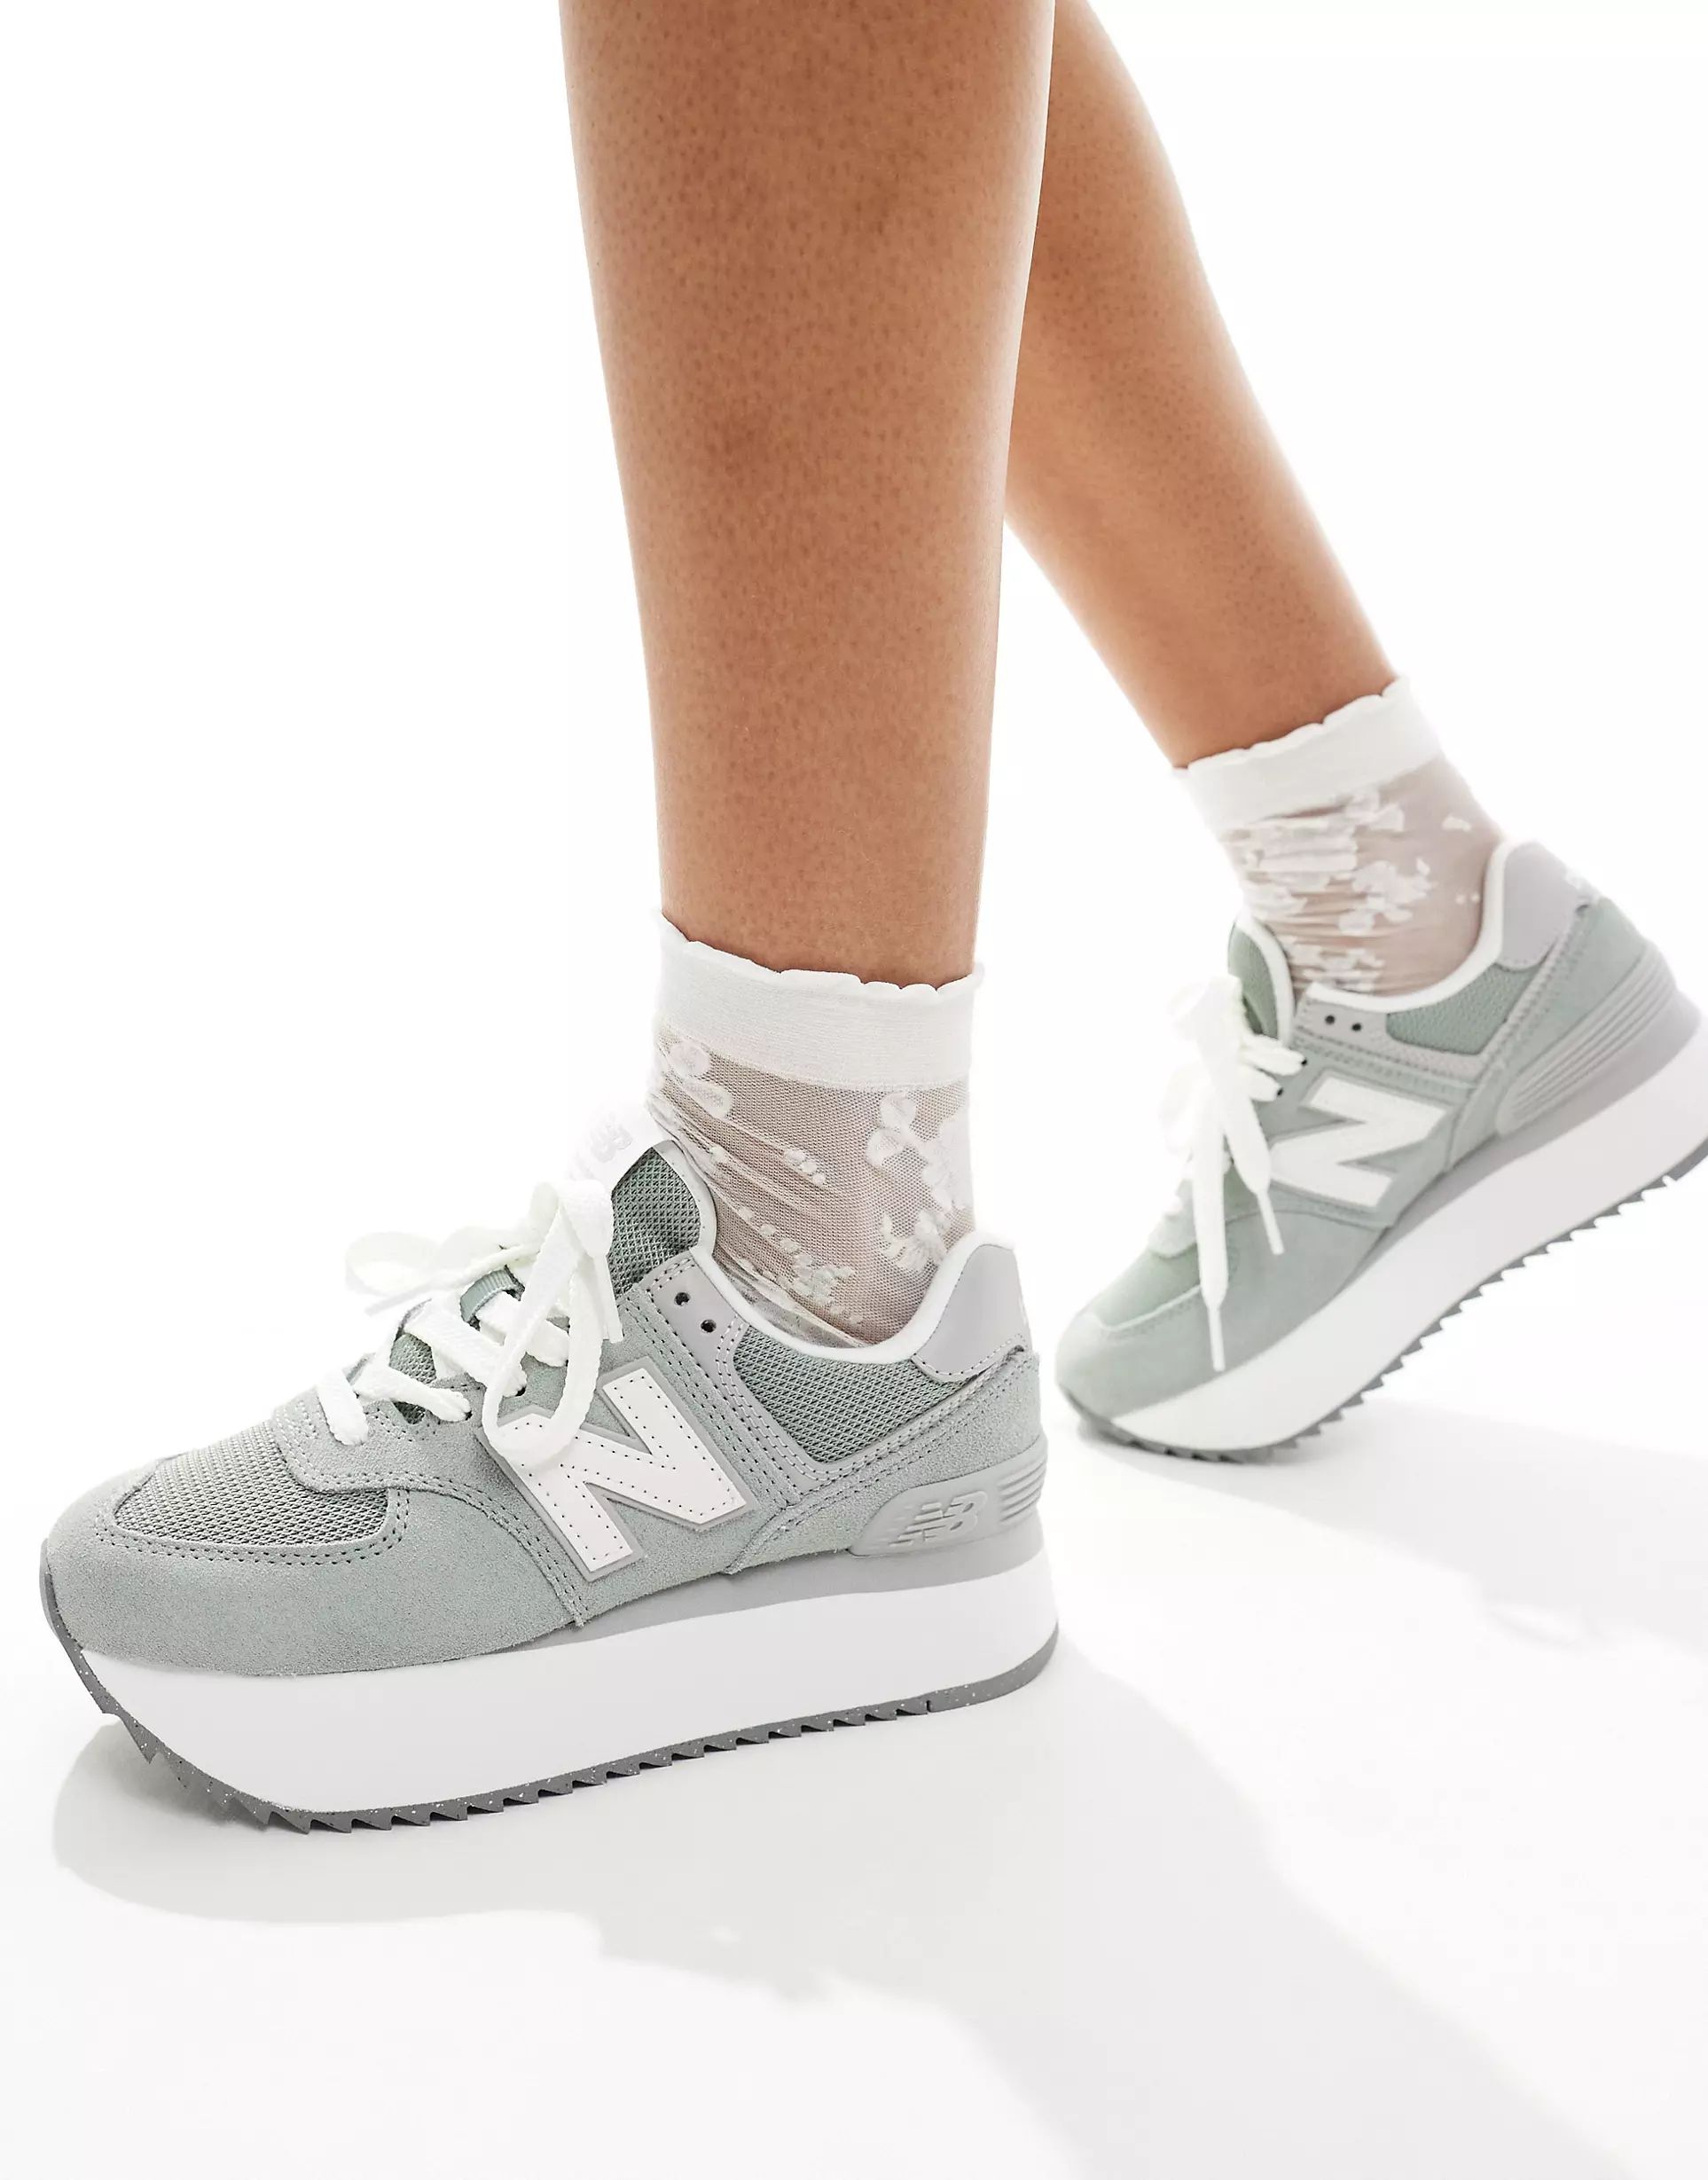 New Balance 574+ platform sneakers in green with gray and white detail | ASOS (Global)